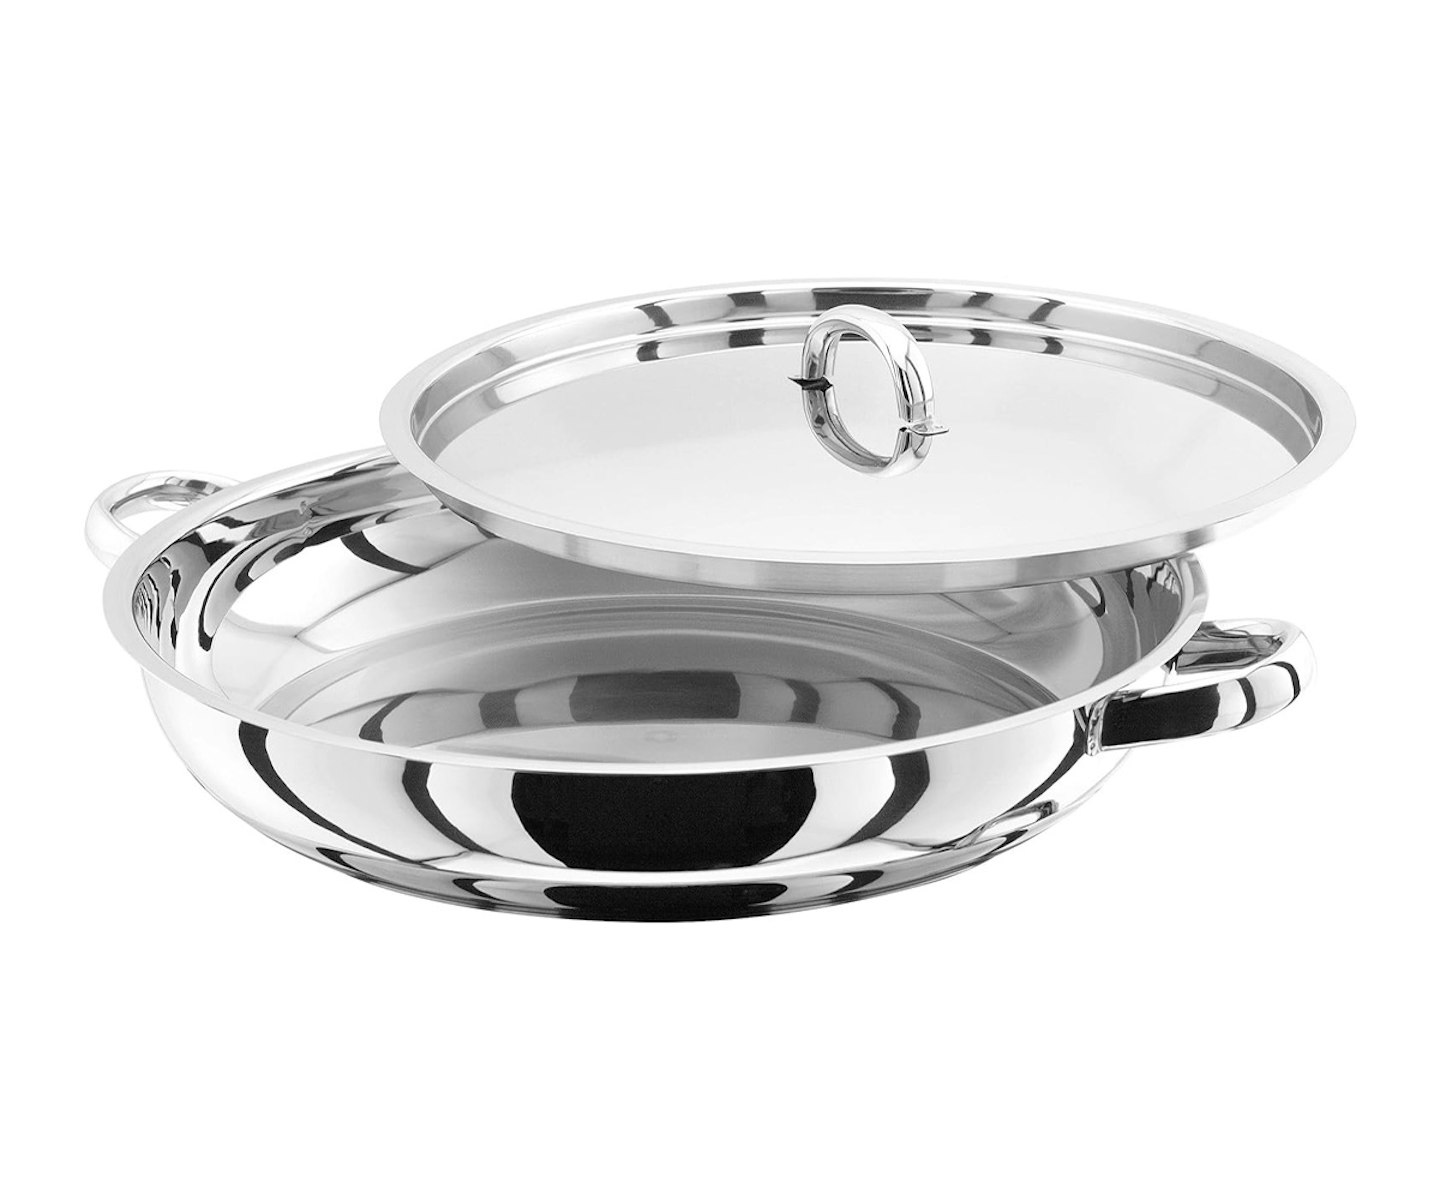 Judge Speciality Cookware